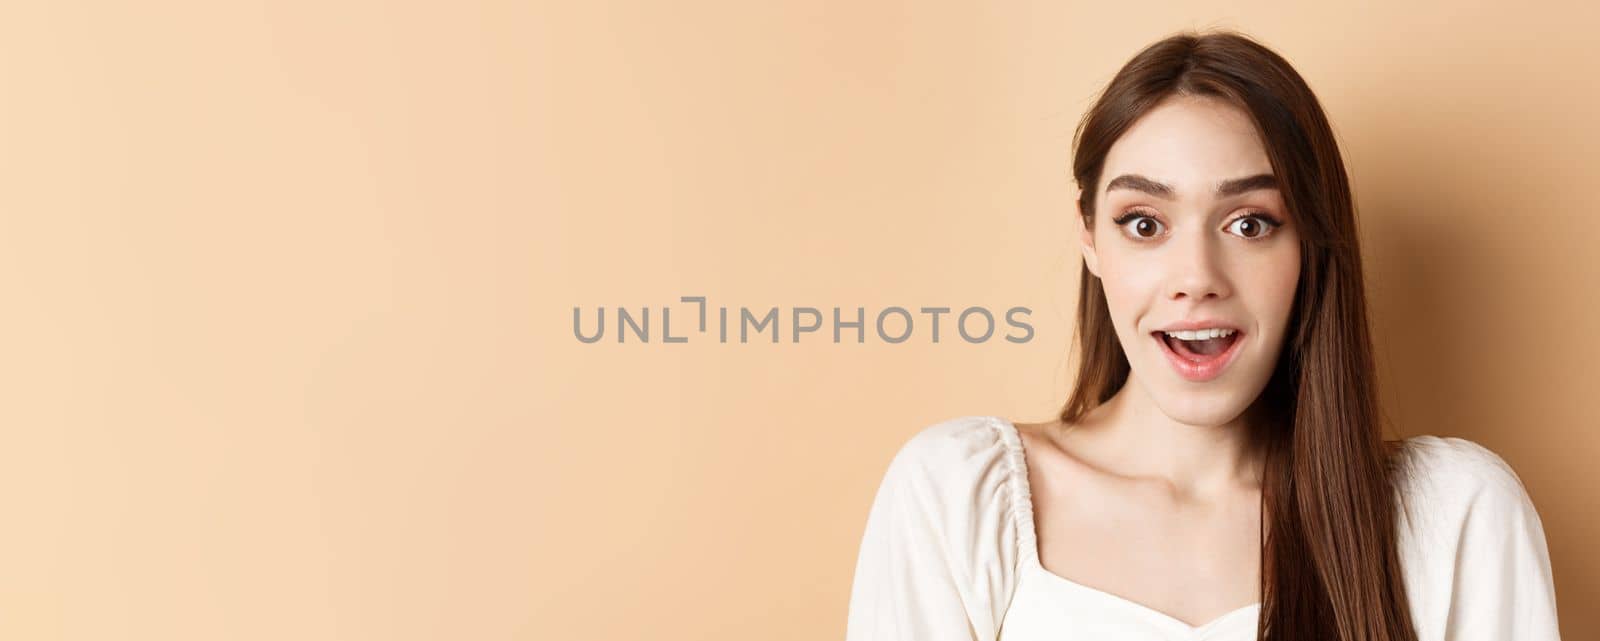 Excited young woman gasping amazed, saying wow and looking at camera, checking out promo offer, standing on beige background.